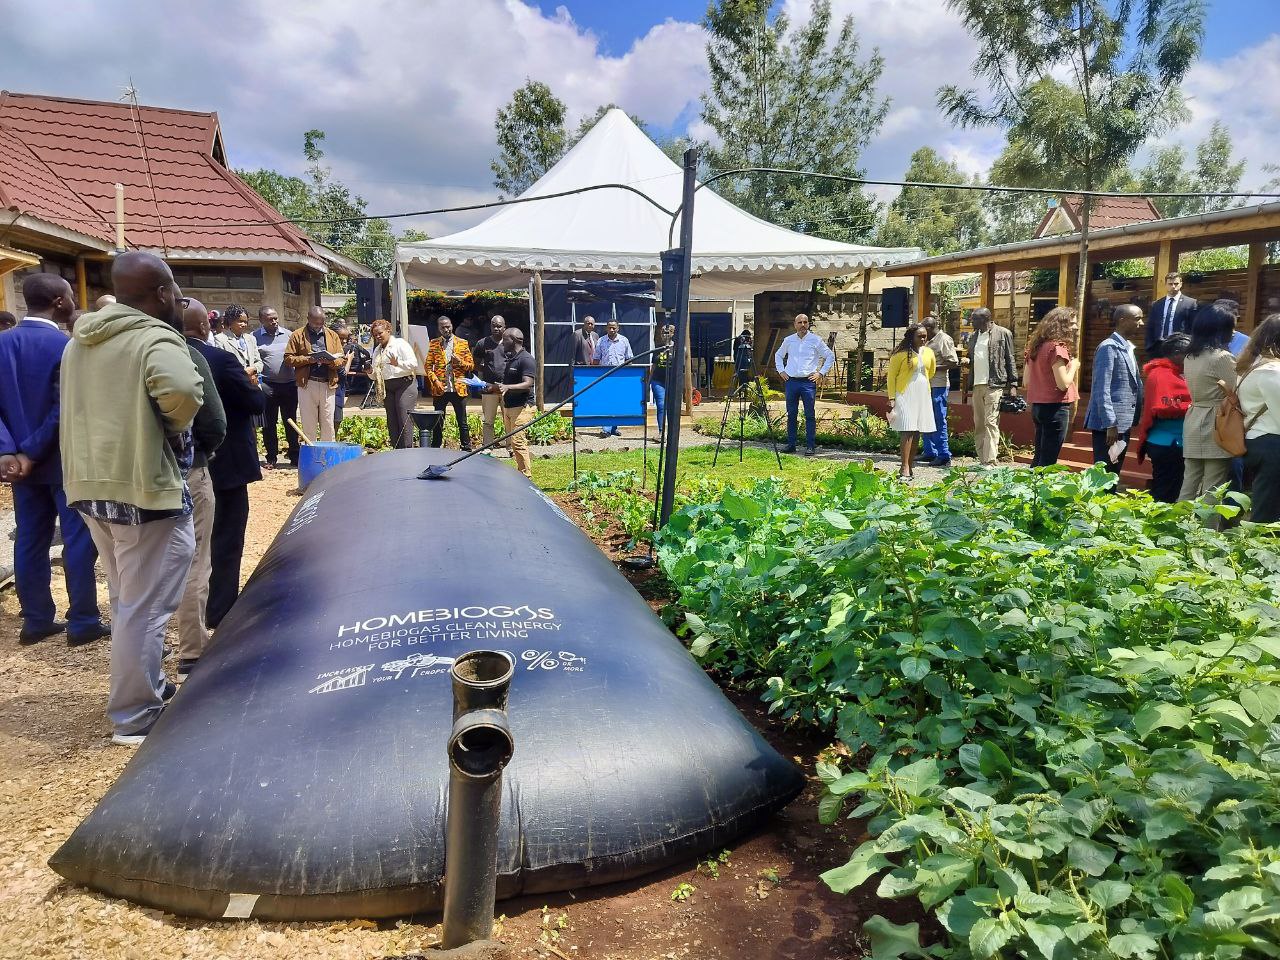 Homebiogas in plans to expand its technology to more counties